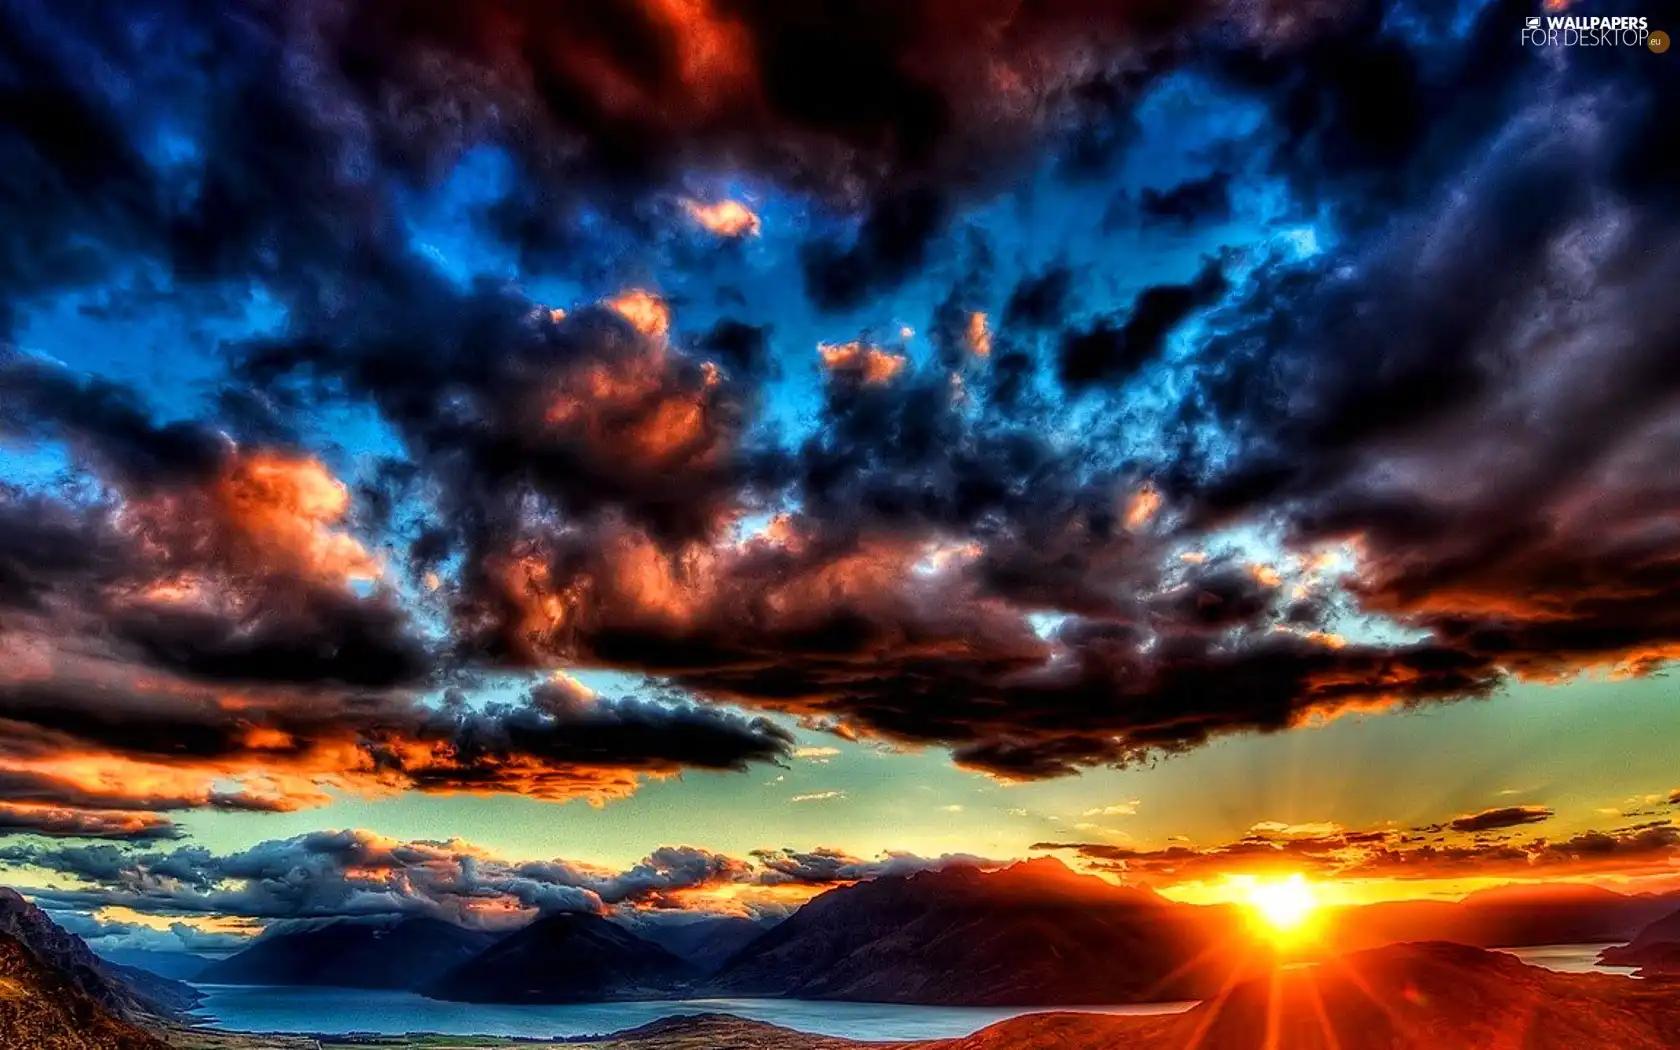 west, clouds, Mountains, sun